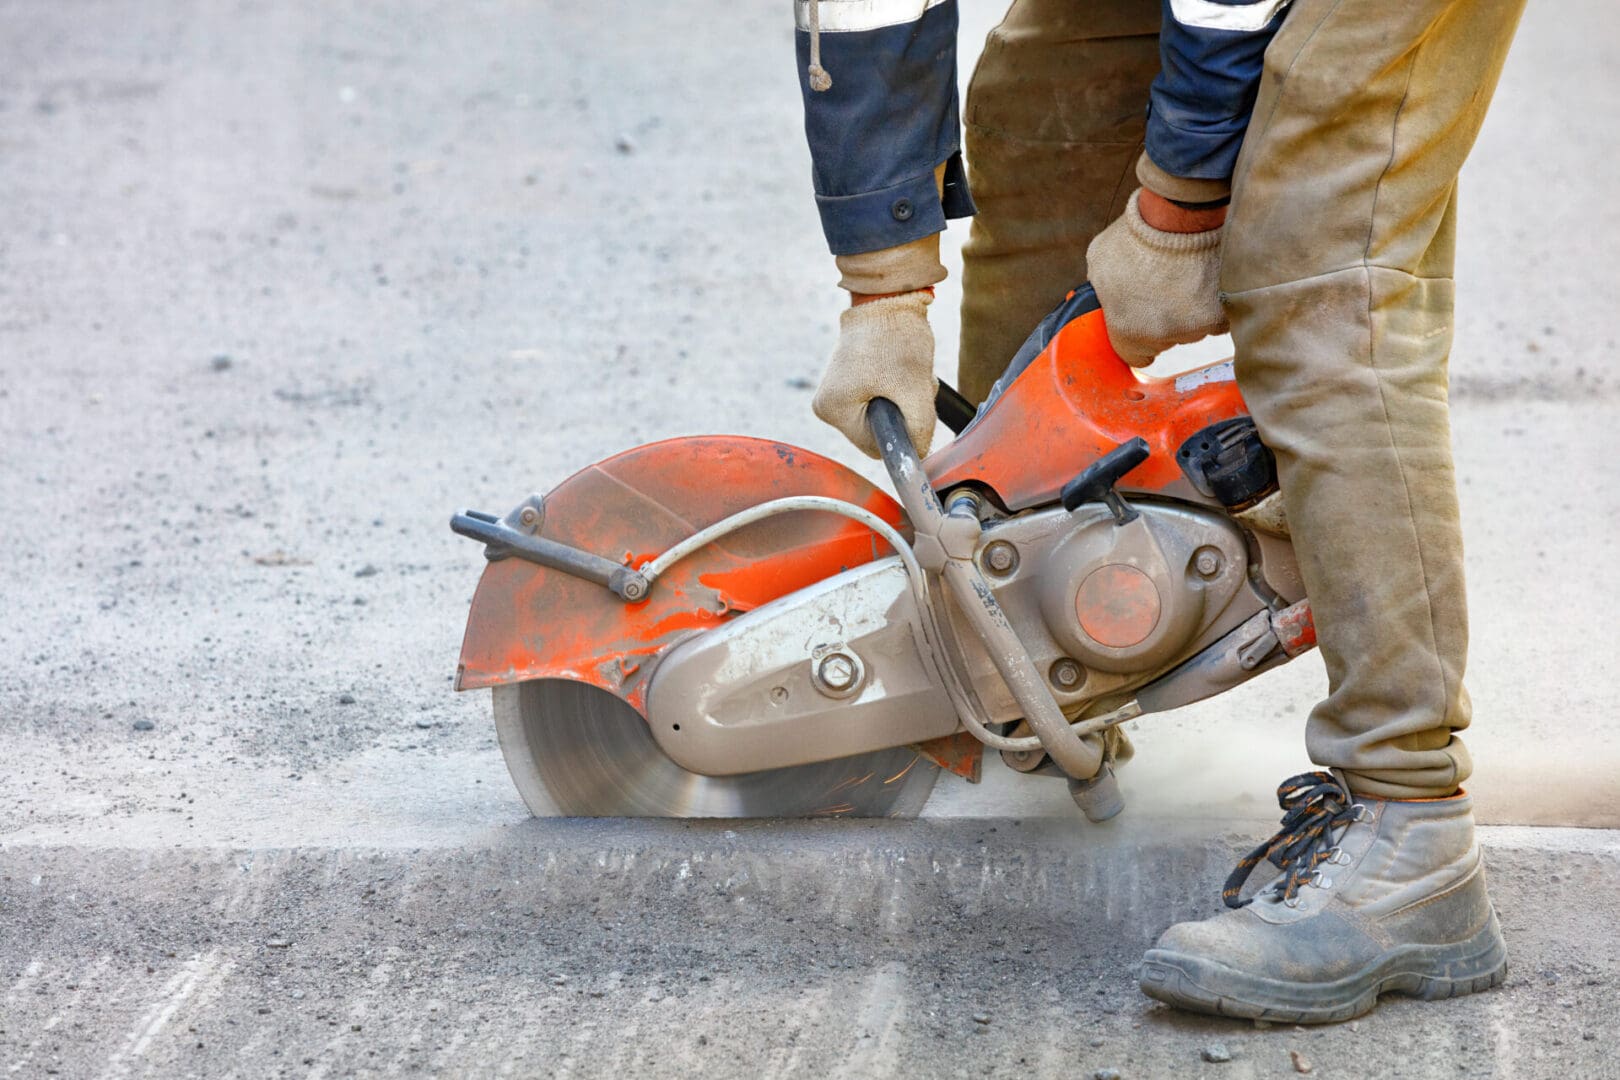 A person cutting concrete with an electric saw.